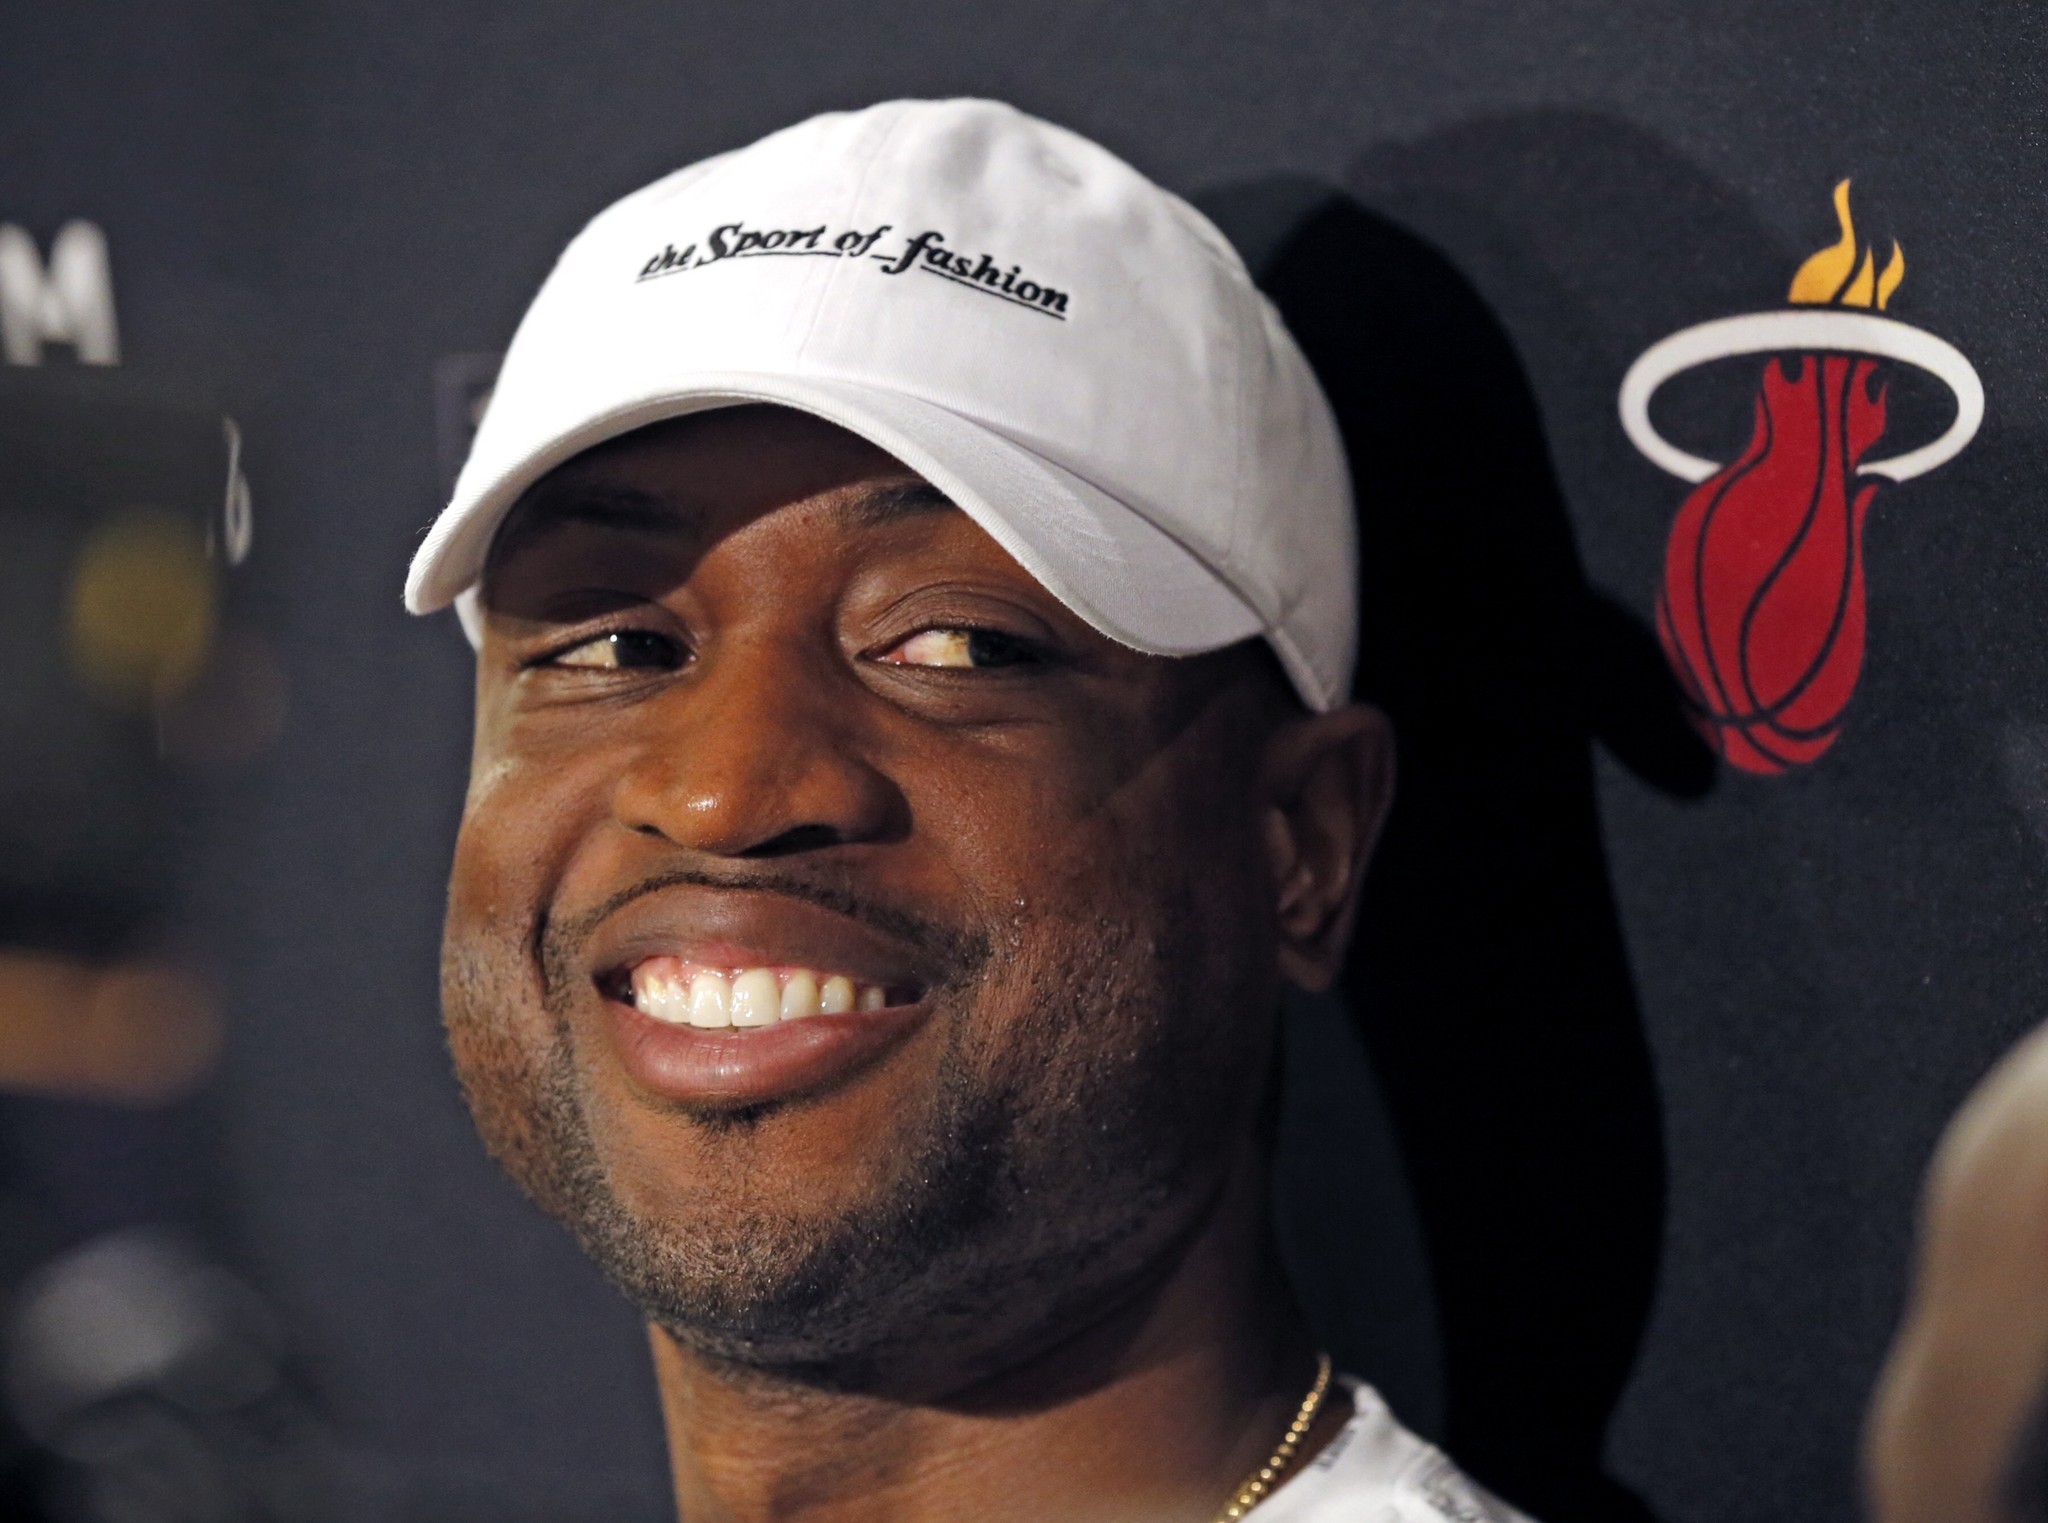 Twitter reacts to Dwyane Wade's Chicago homecoming - Chicago Tribune